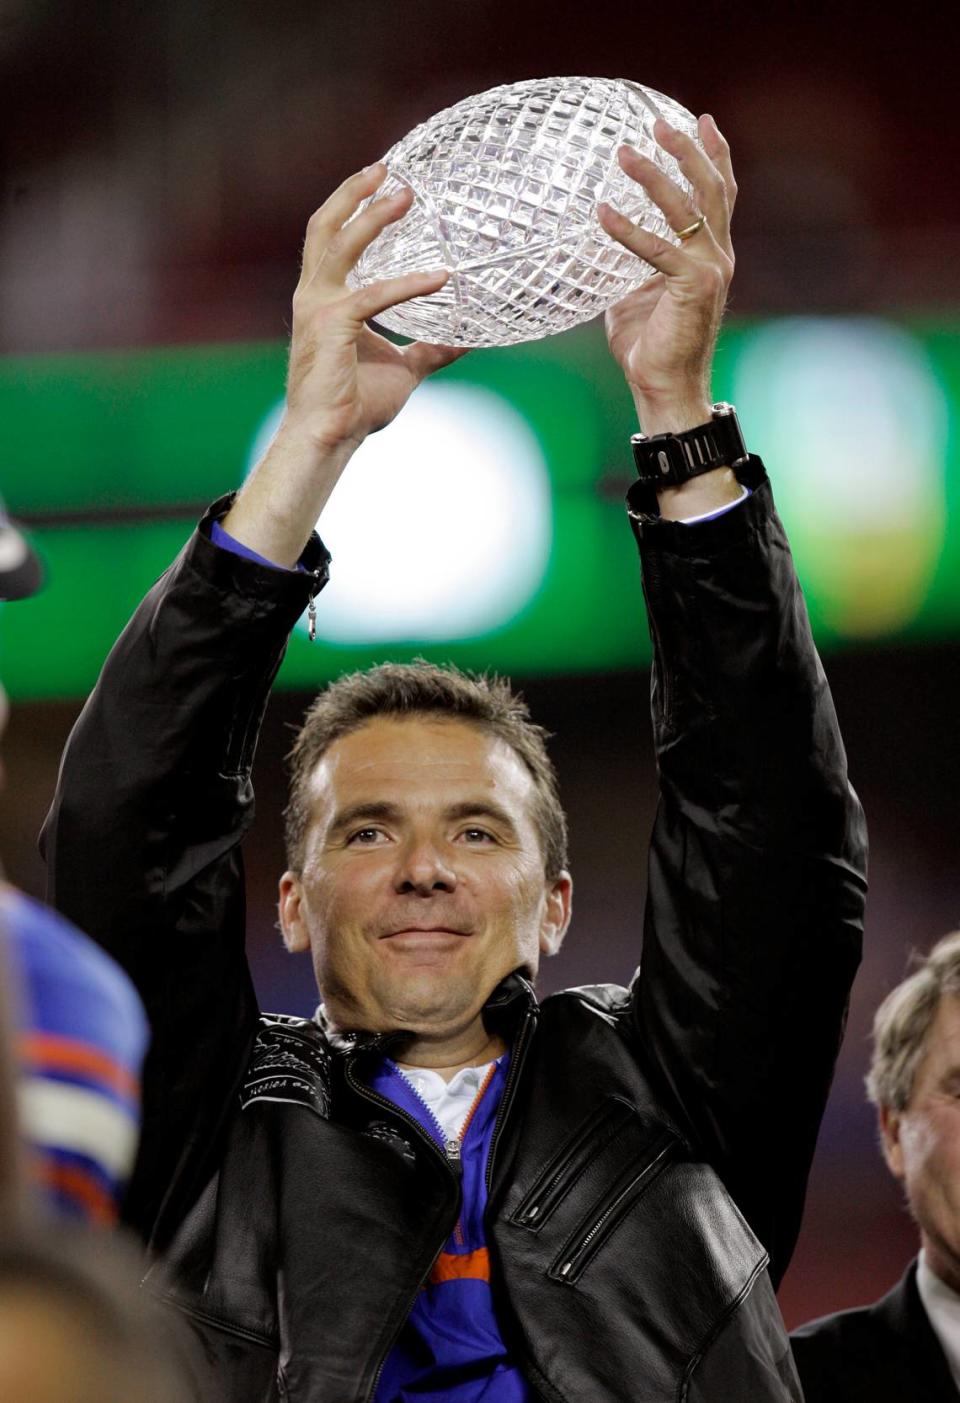 Urban Meyer led the Gators to two national titles after being hired away from Utah. Meyer initially cited health concerns for his brief resignation last year, but did not mention his health as a problem this time.